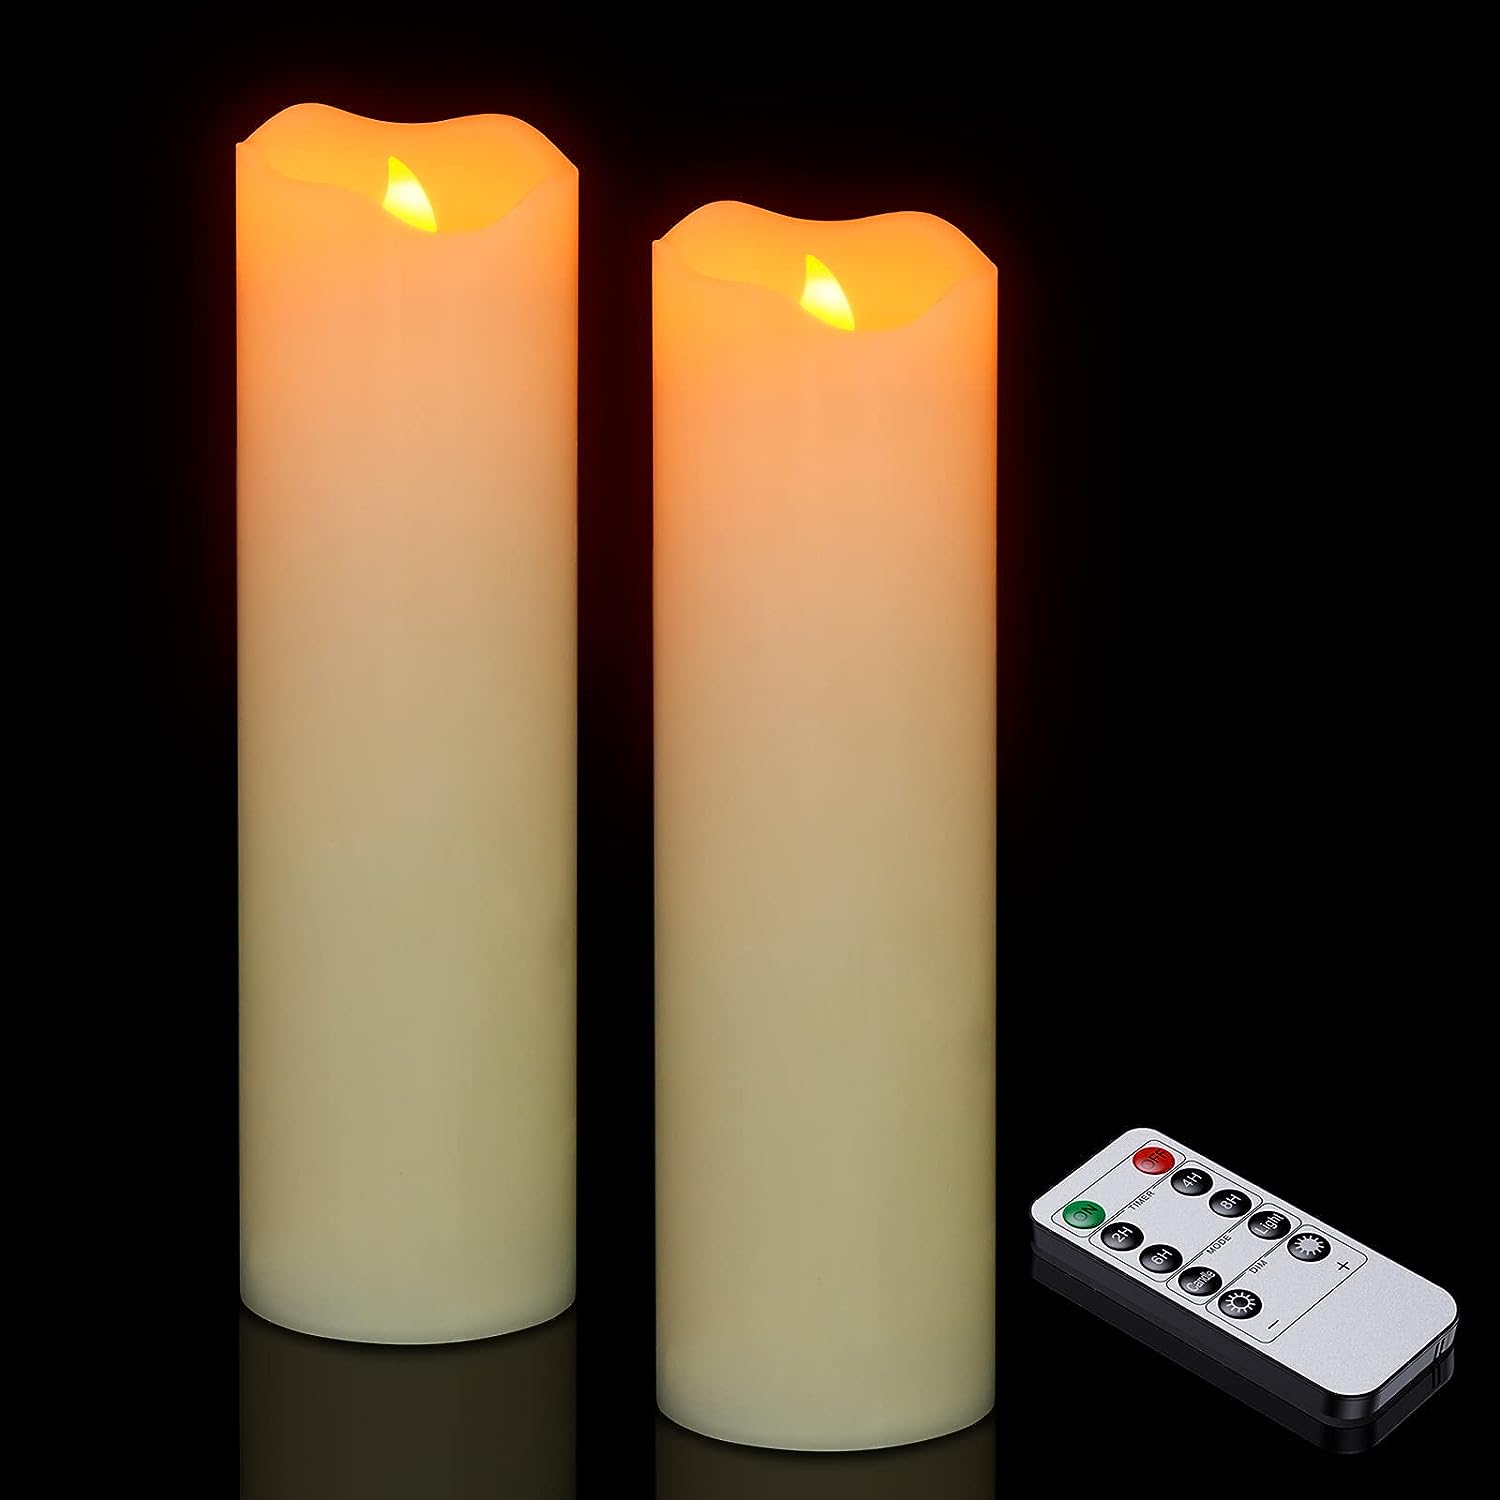 Ymenow Real Wax LED Pillar Candles, 2pcs 10'' Battery Operated Flameless Pillar Candles Flickering Ca